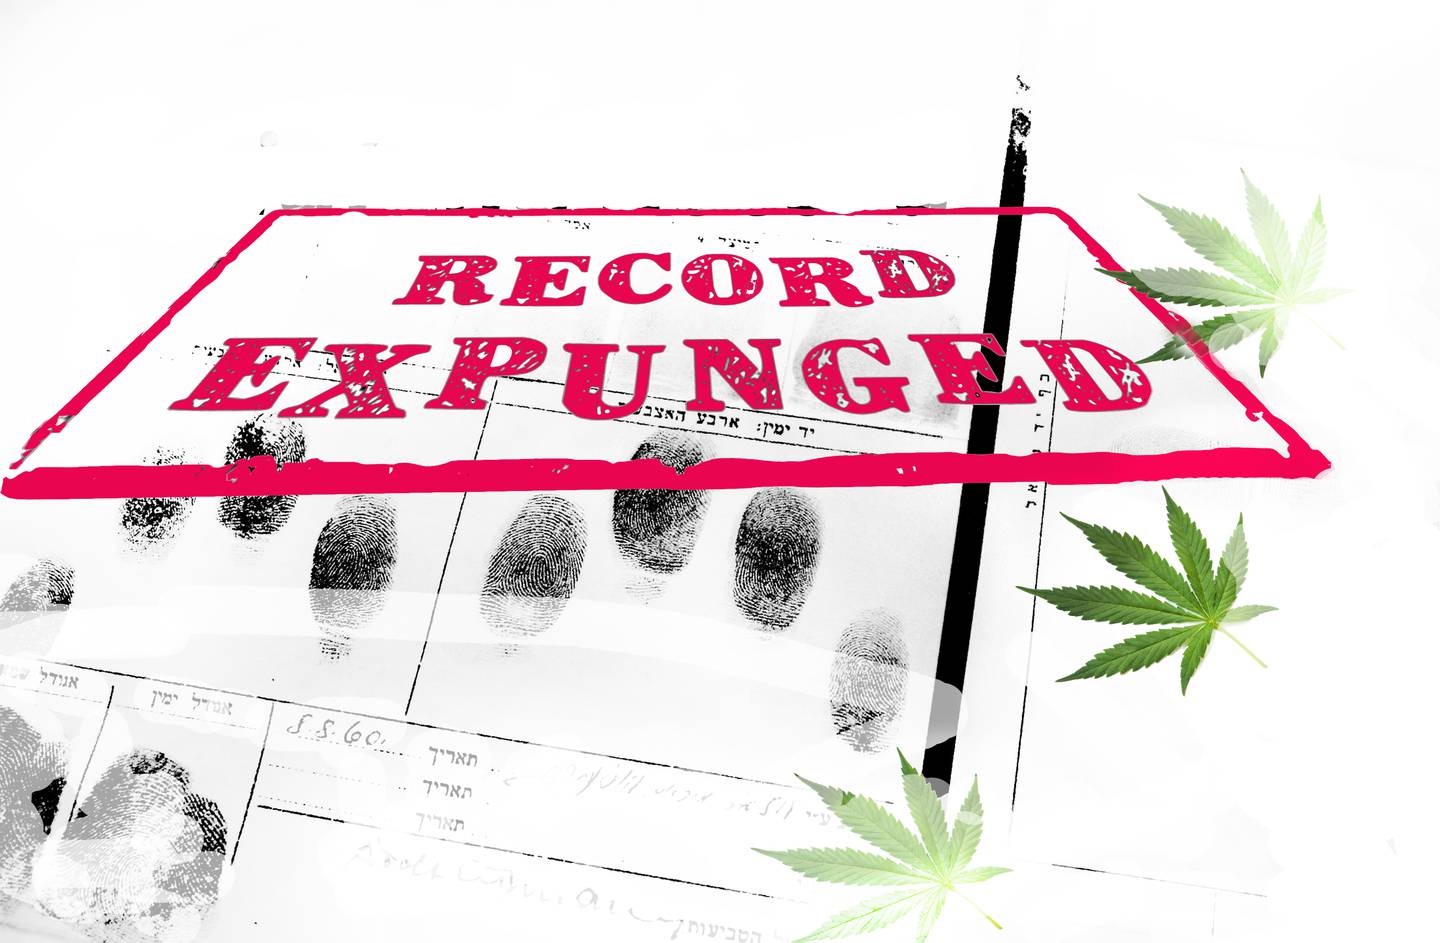 Photo illustration about what can people with marijuana charges on their records expect when it comes to the expungement provisions passed into law by Question 4.